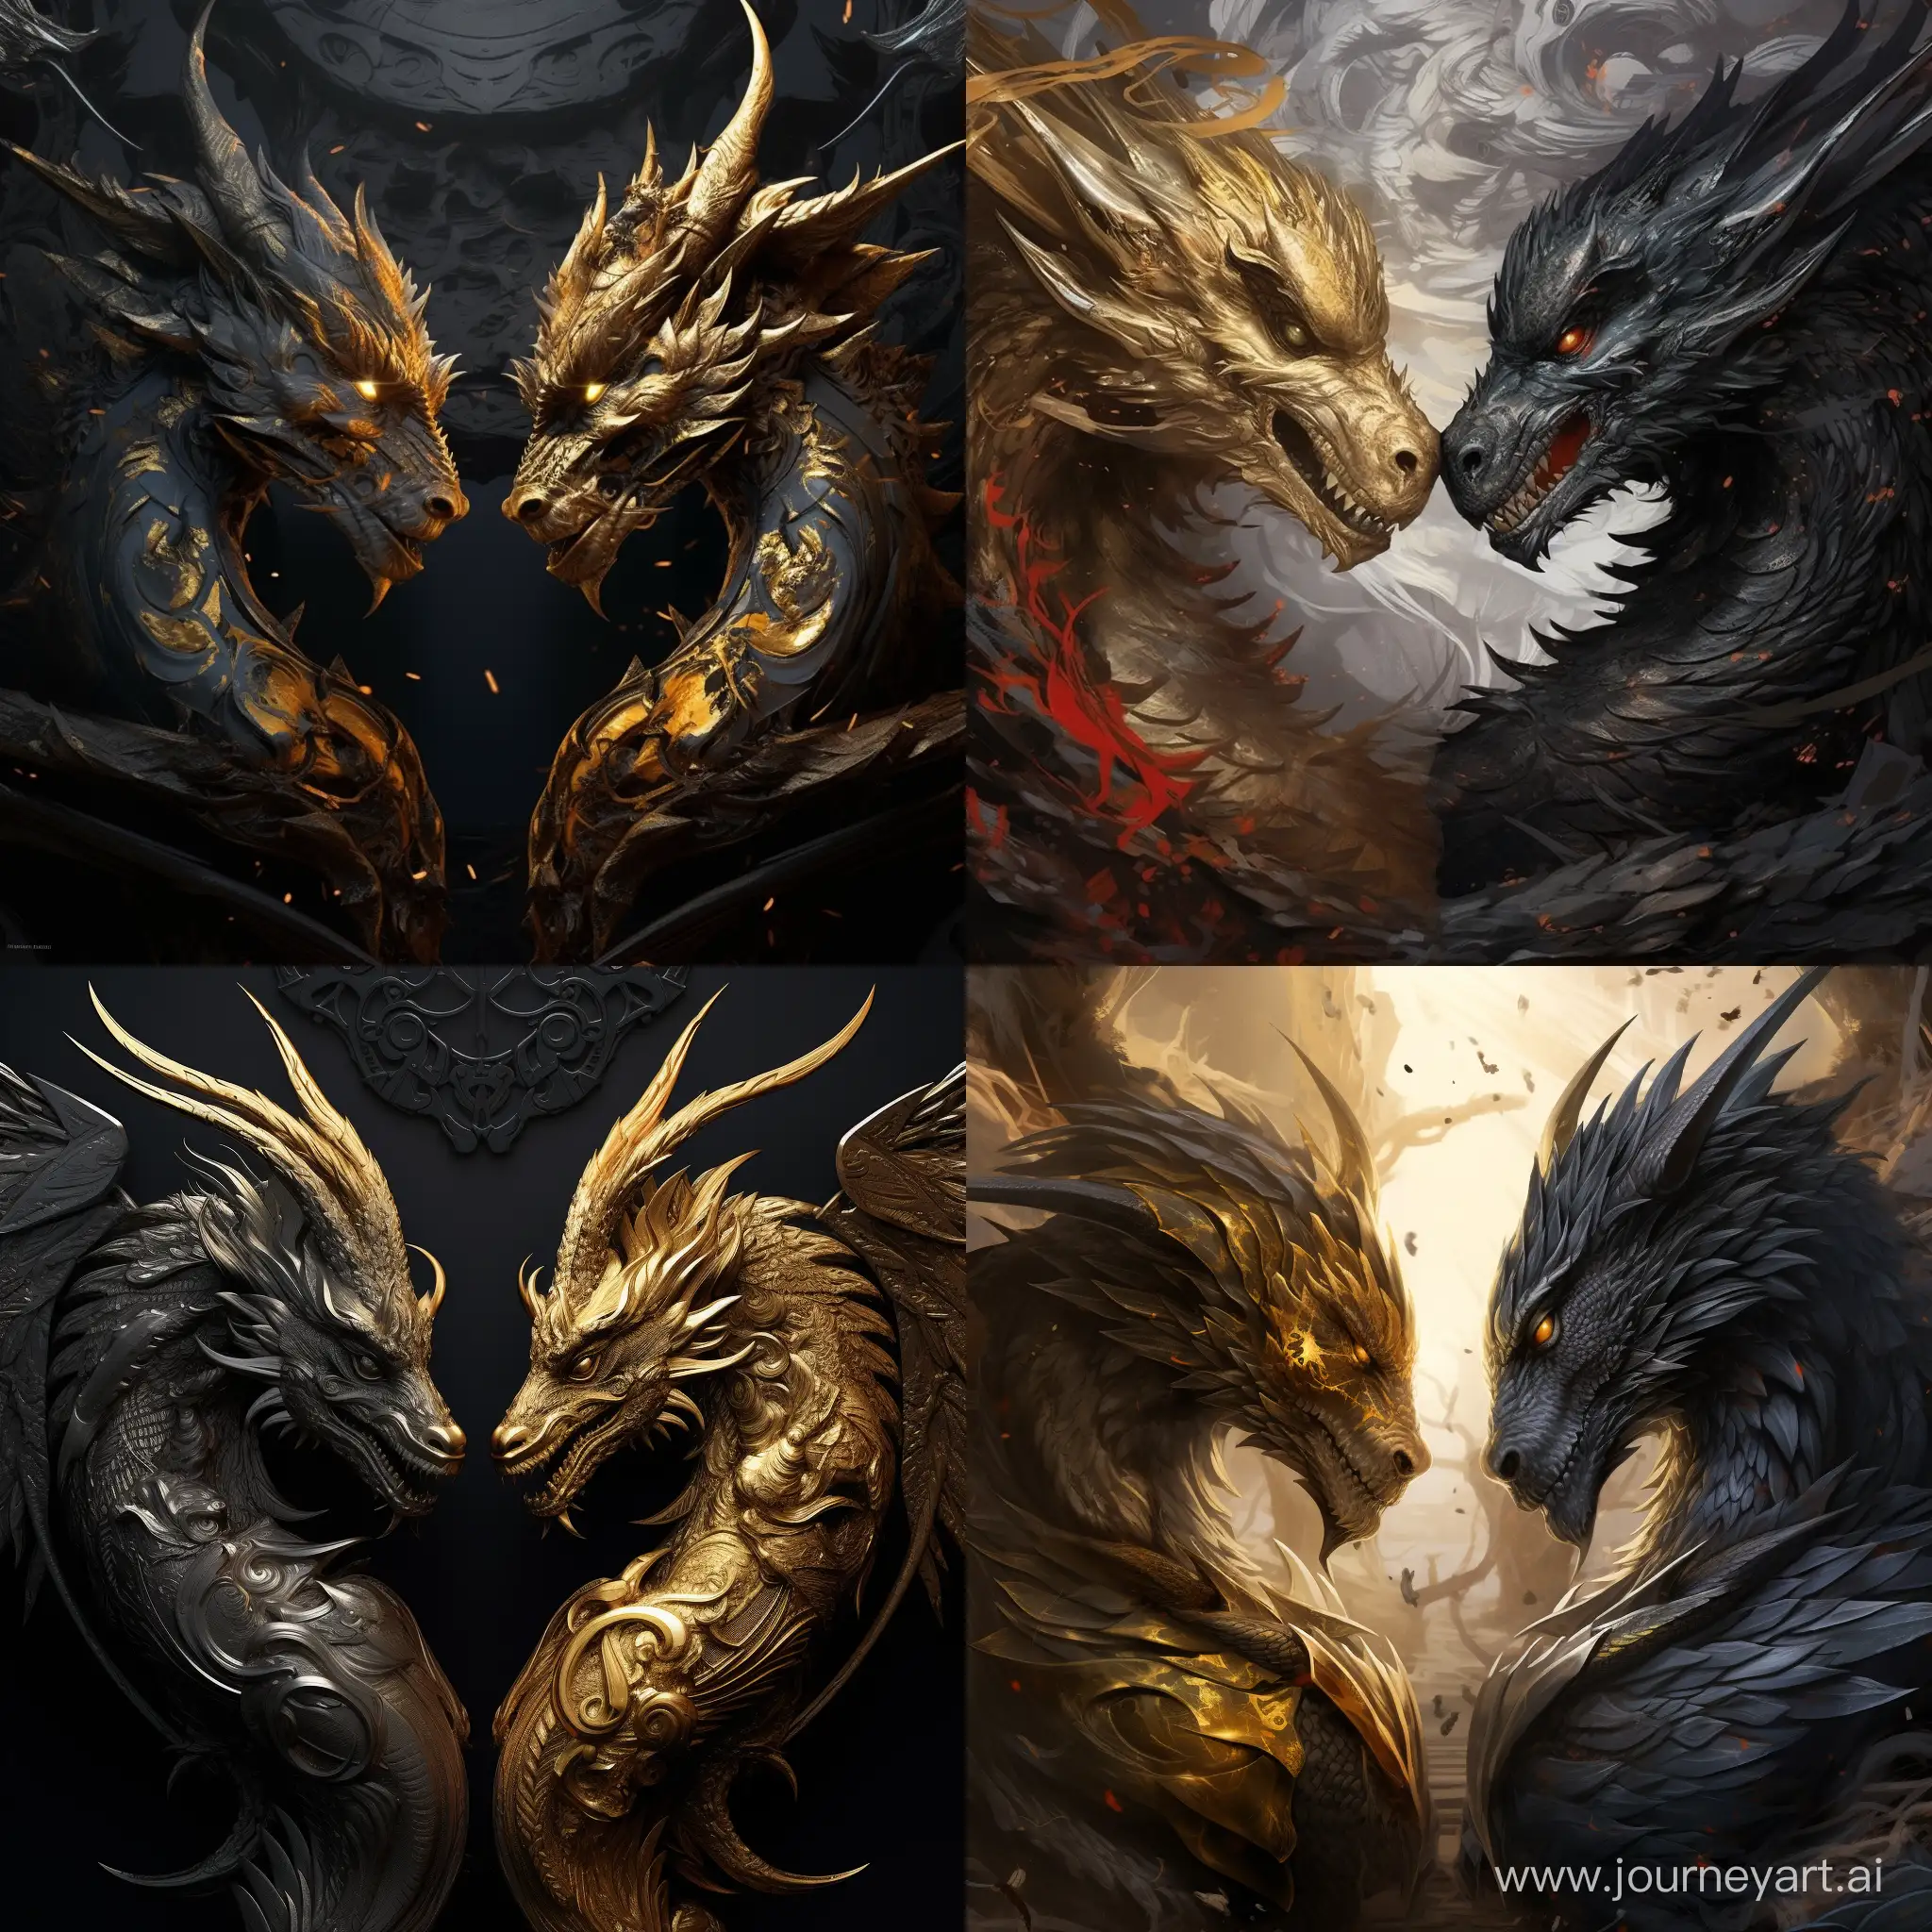 Epic-Clash-of-Black-and-Golden-Dragons-Game-of-Thrones-Style